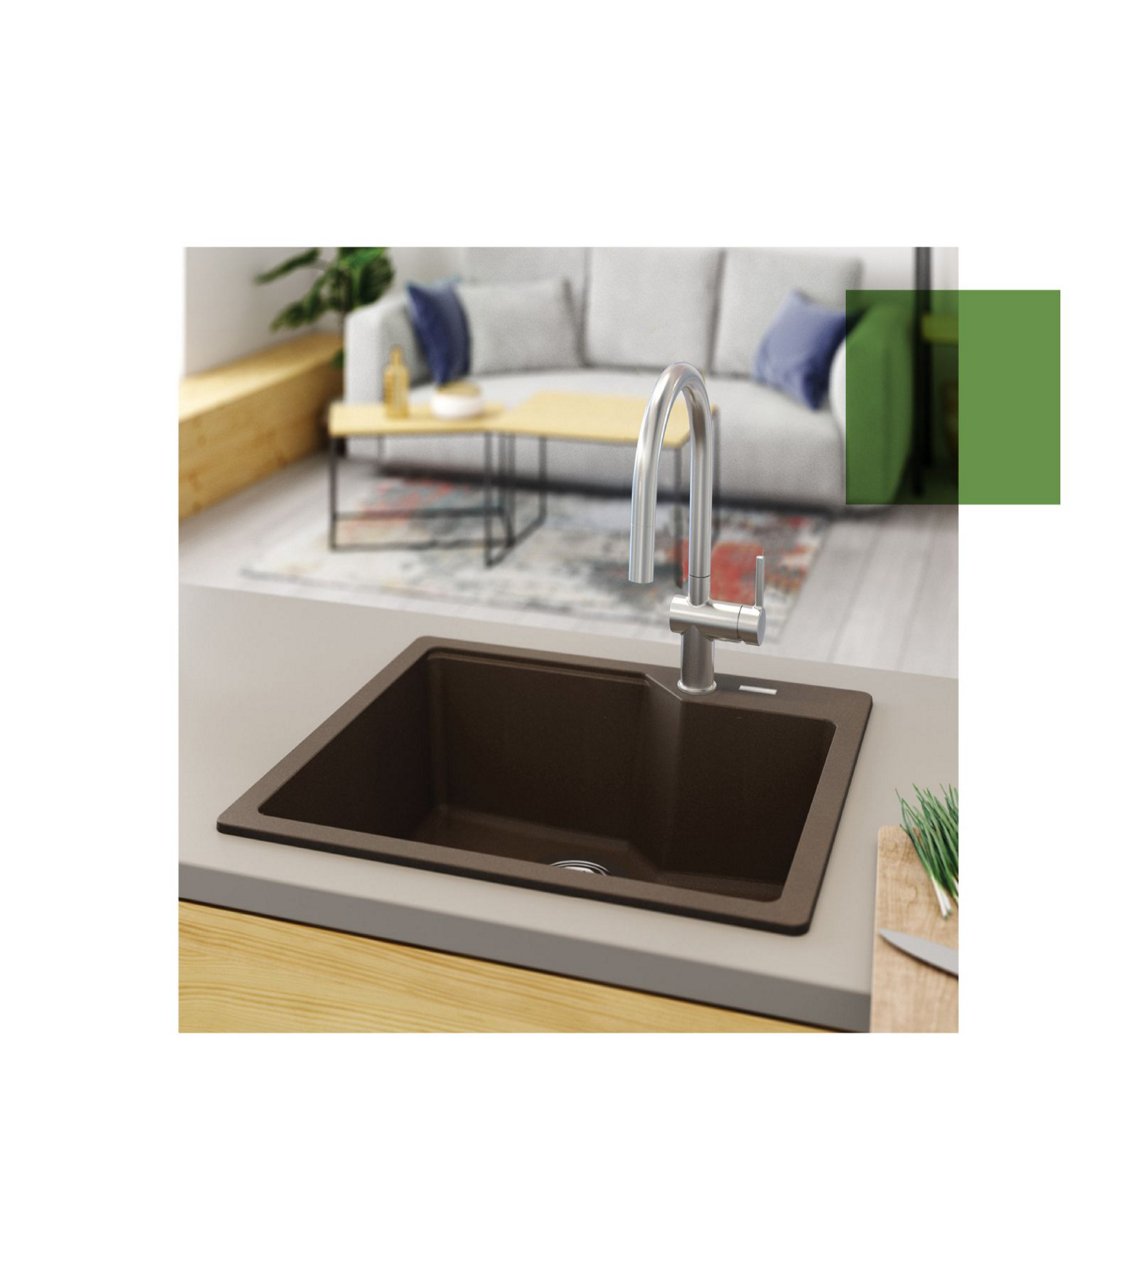 Kindred mocha granite drop in single bowl kitchen sink with a stainless steel faucet in kitchen island